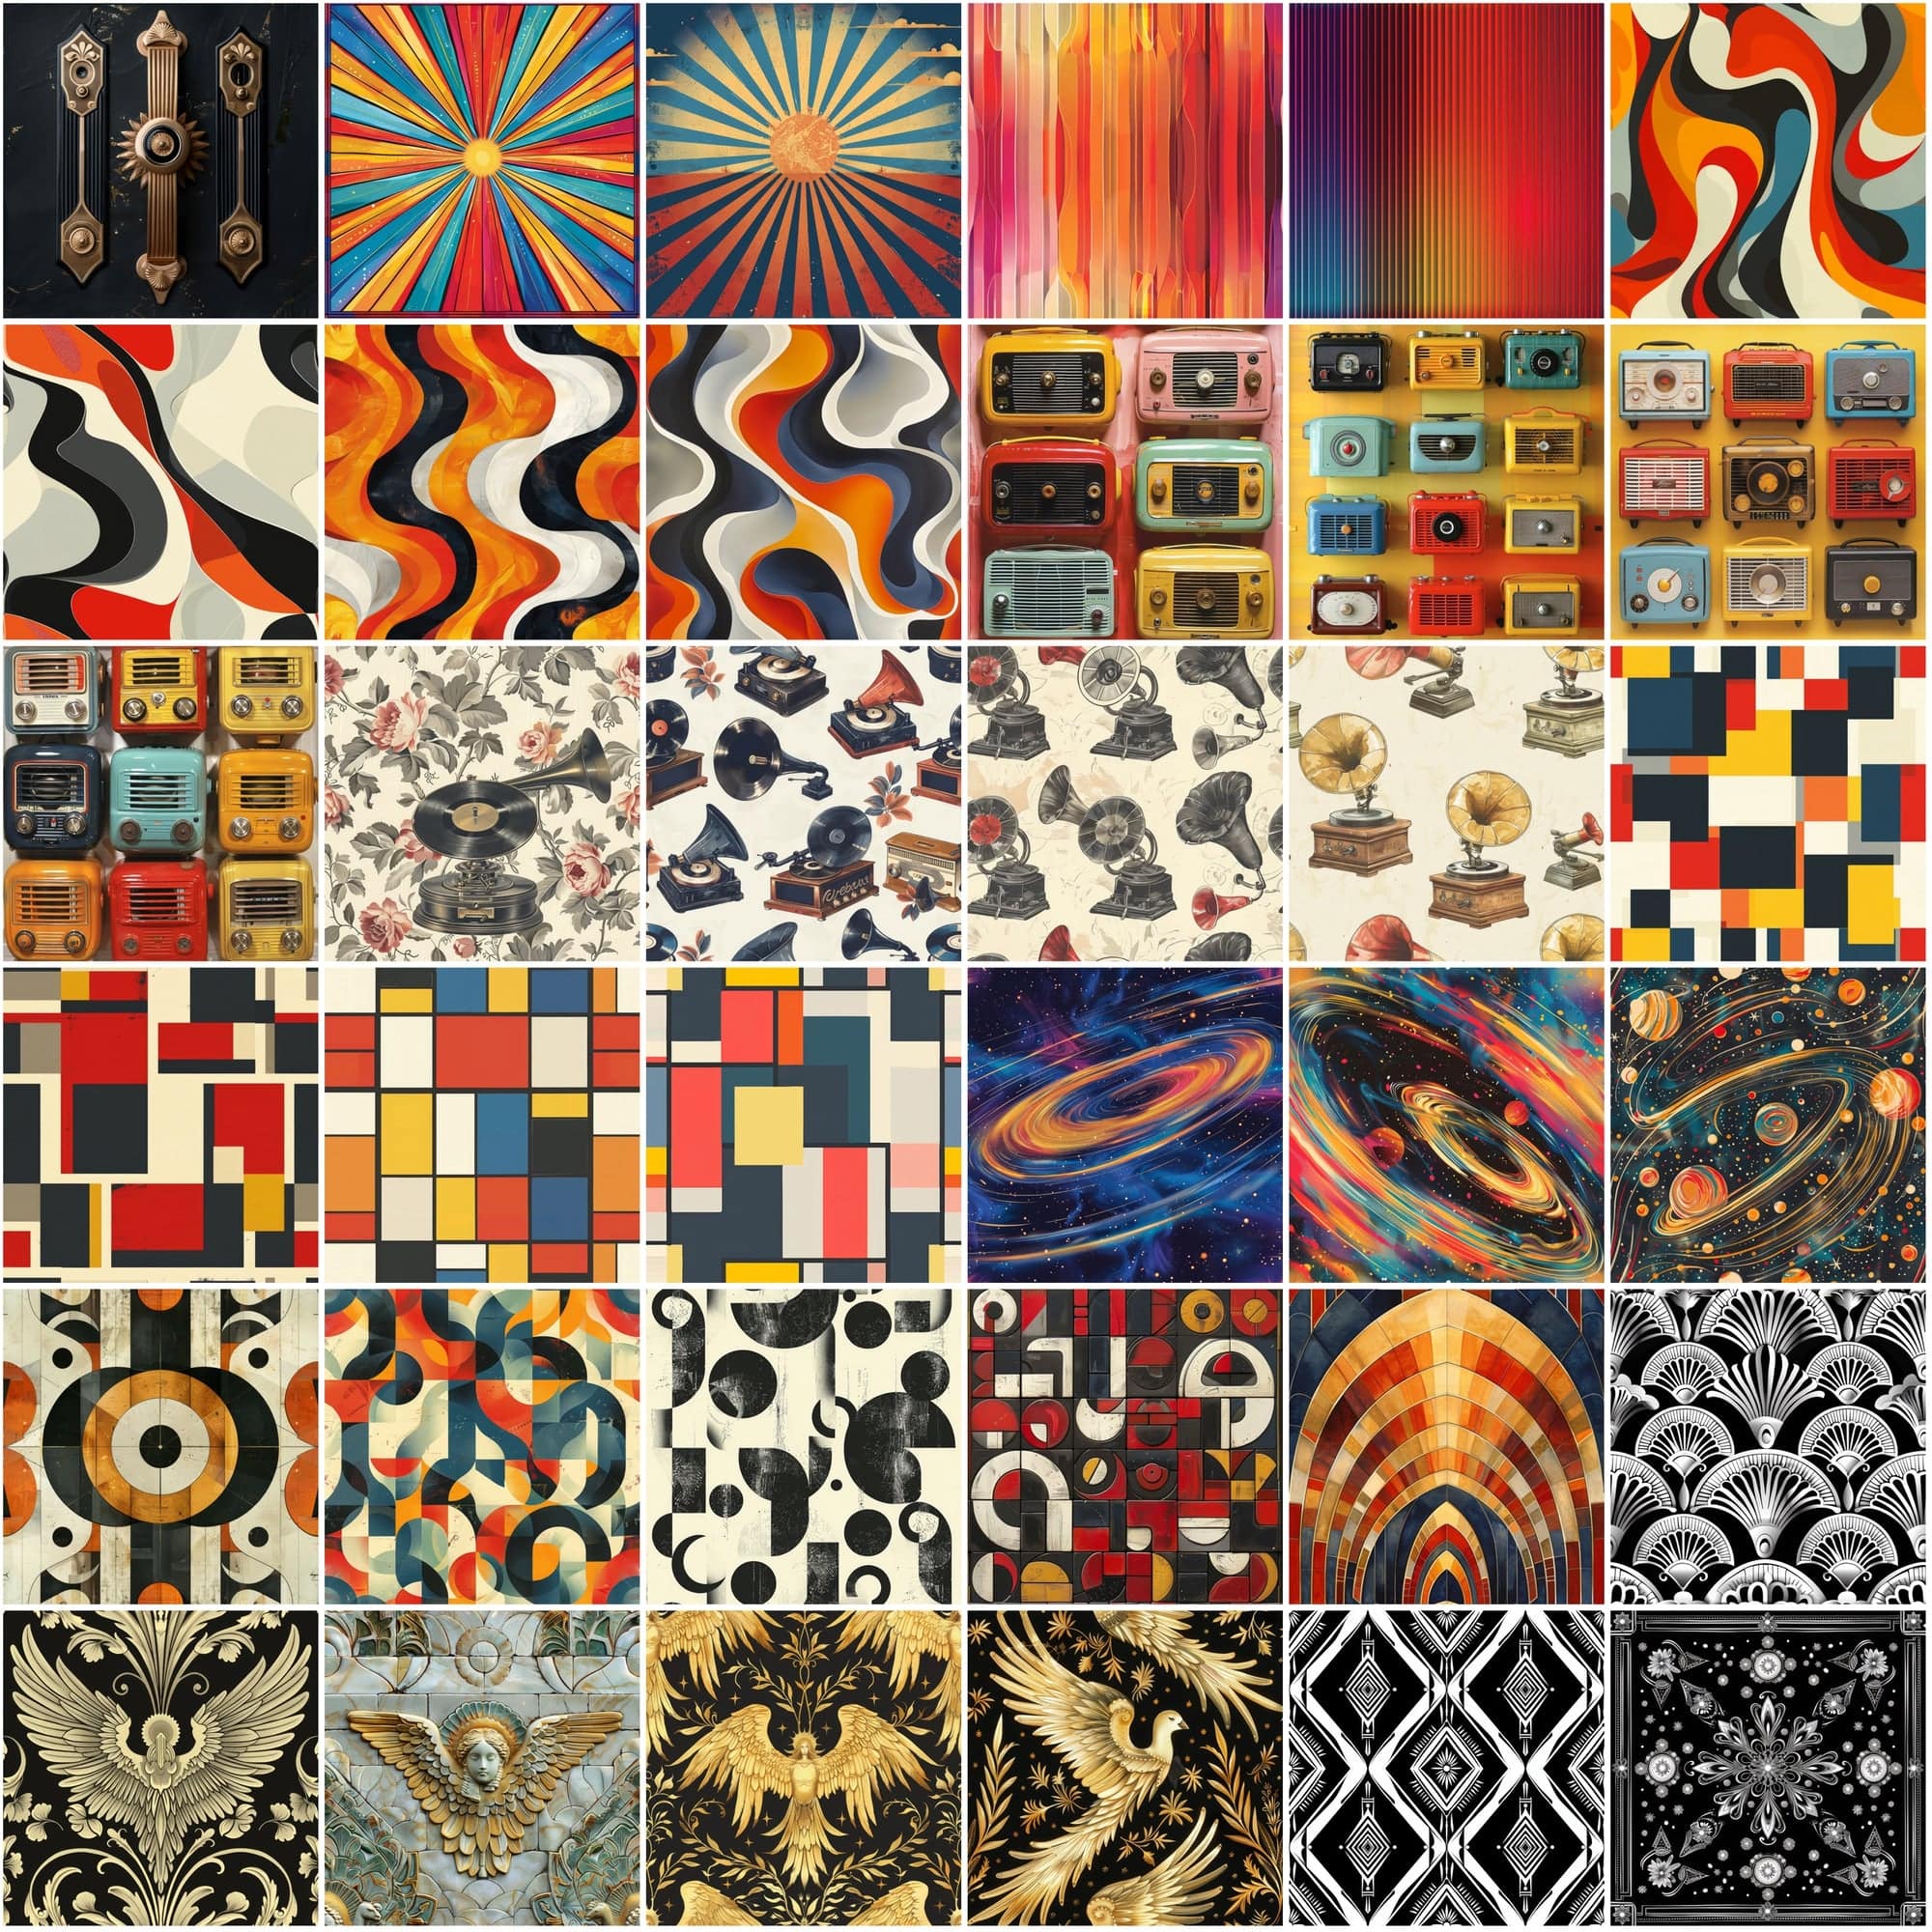 340 Seamless Texture Images with Photoshop Patterns - Abstract, Geometric, Art Deco, High-Resolution, Commercial Use Digital Download Sumobundle